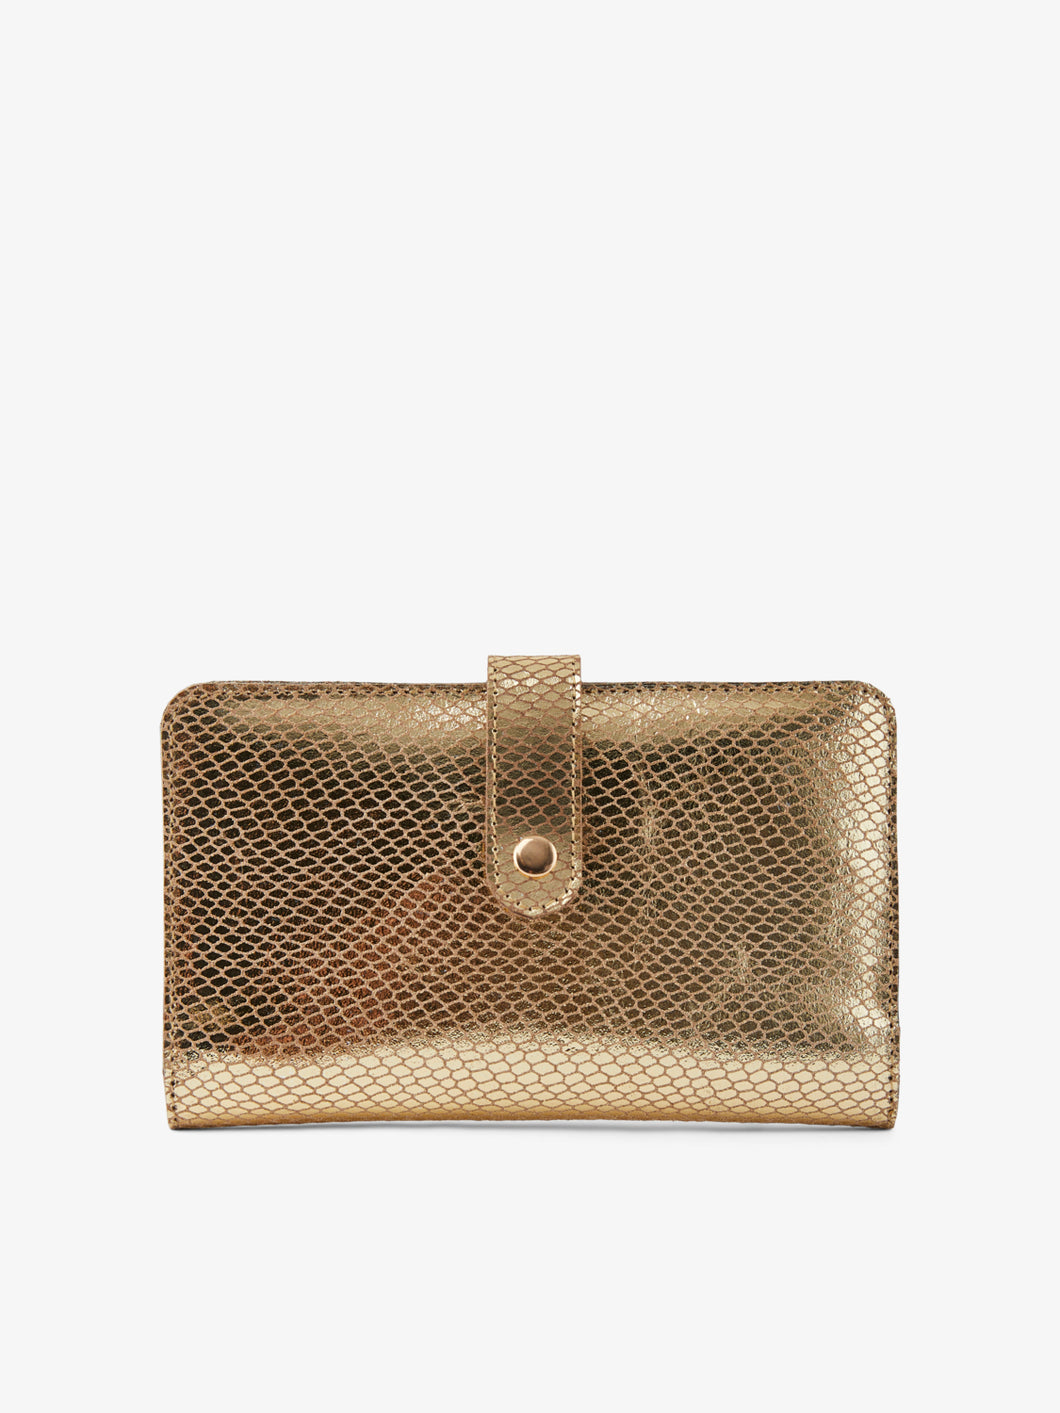 Gold Leather Purse